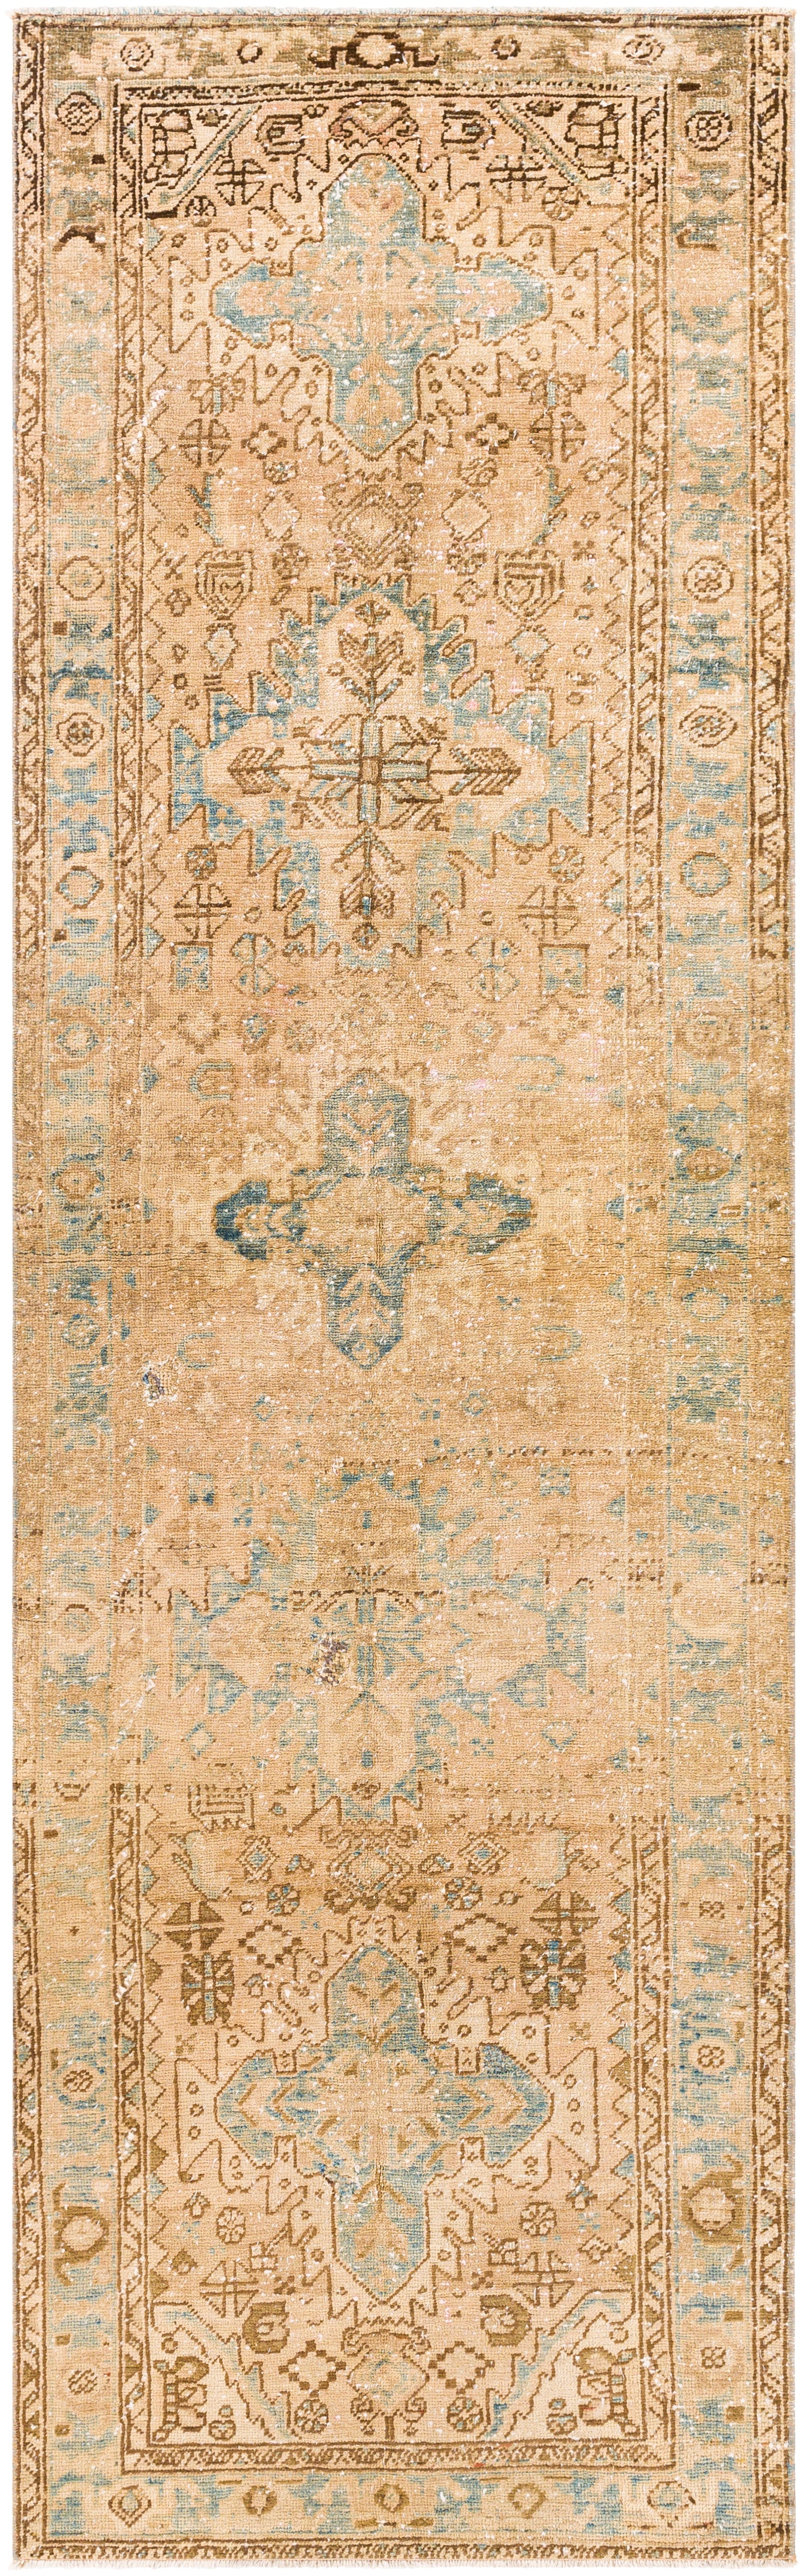 Antique One of a Kind 29804 Hand Knotted Wool Indoor Area Rug by Surya Rugs